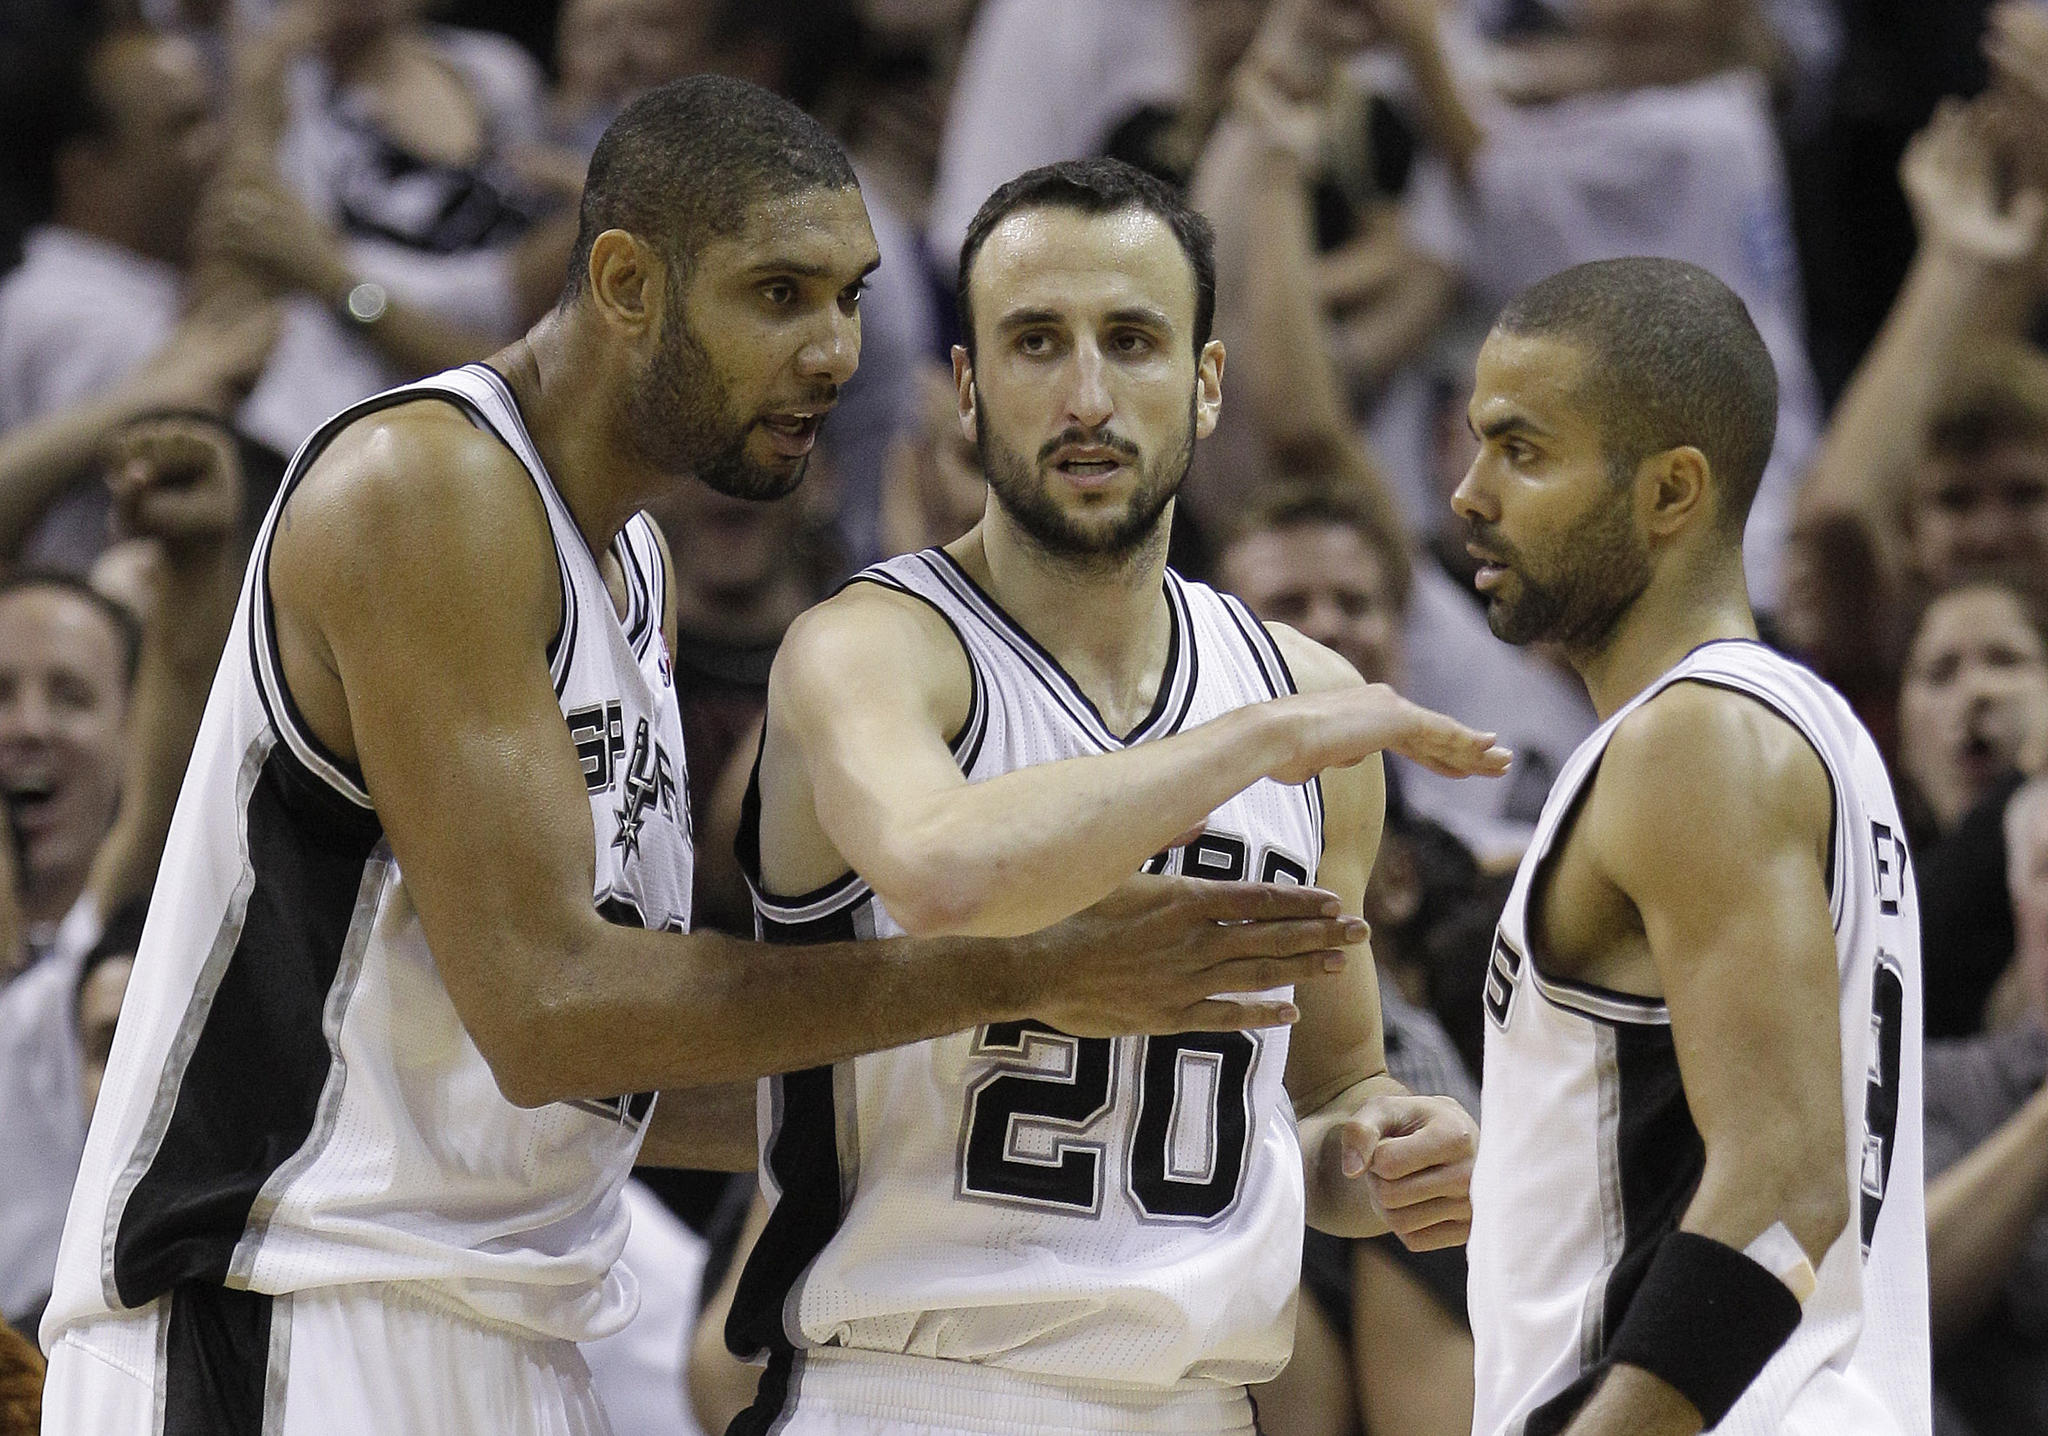 Tracing the 50-year history of the San Antonio Spurs